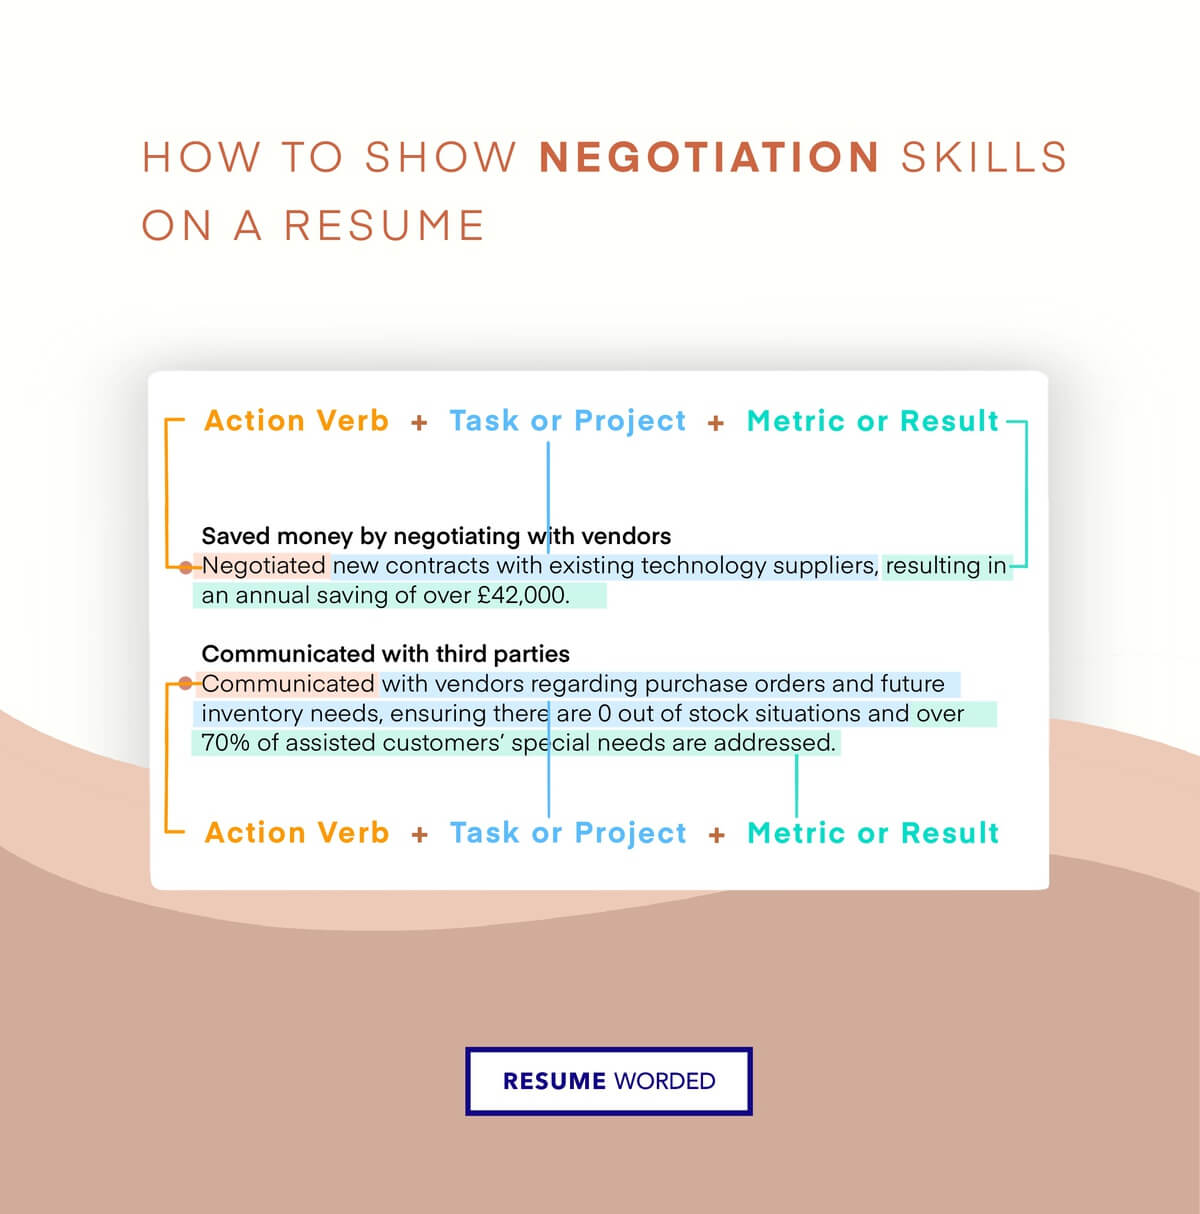 Highlight legal, commercial and negotiation skills - Contract Manager Resume